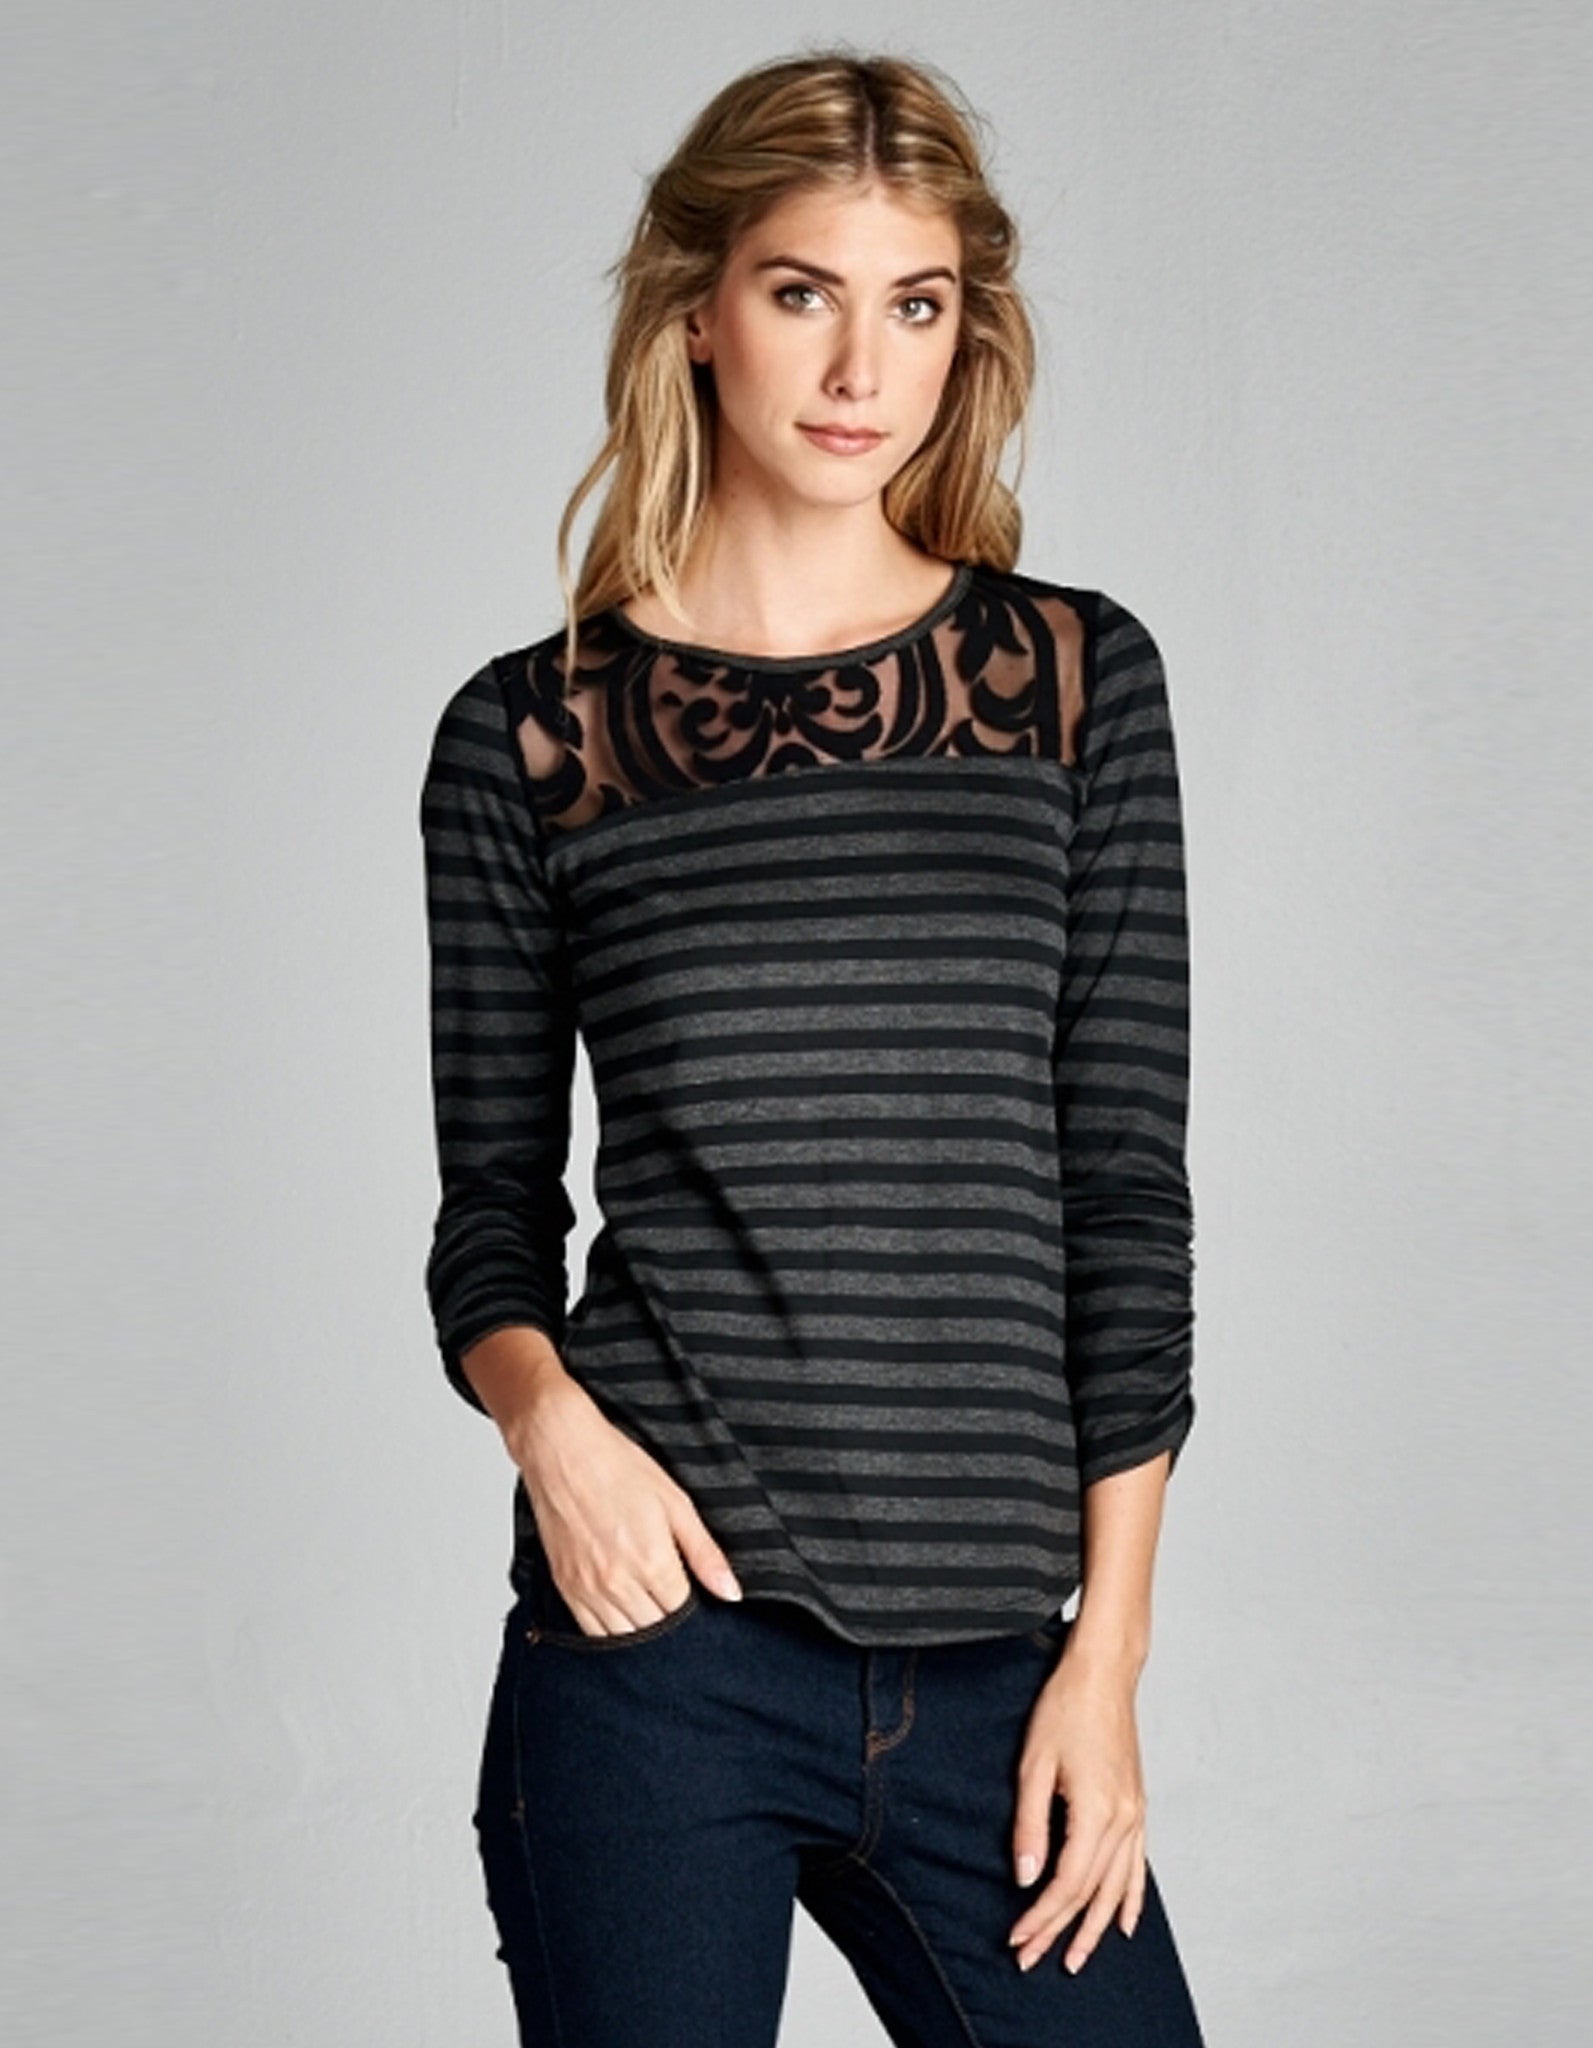 Striped Top with Lace Detail